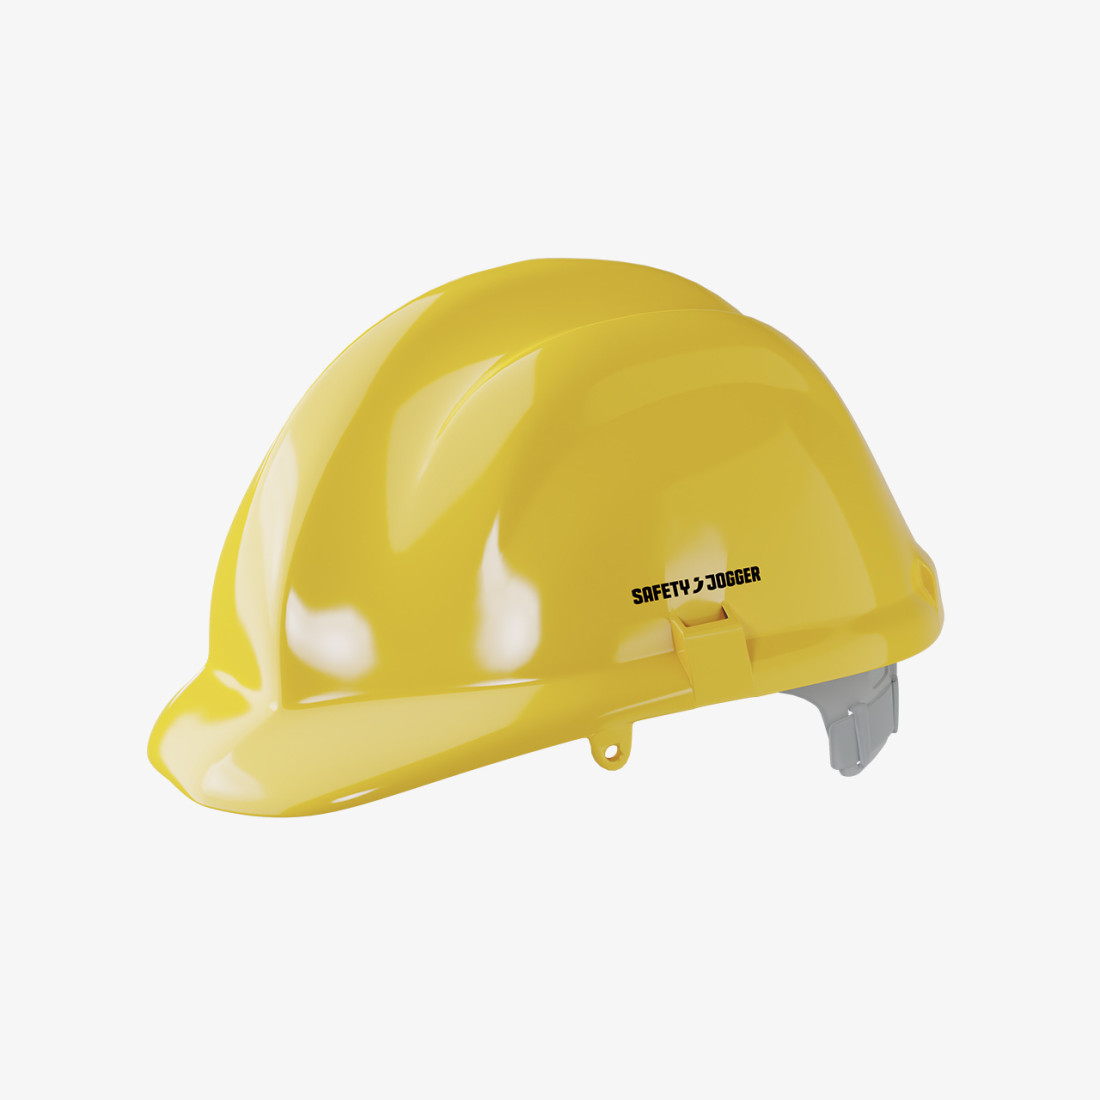 KANHAS Safety Helmet - Personal protection